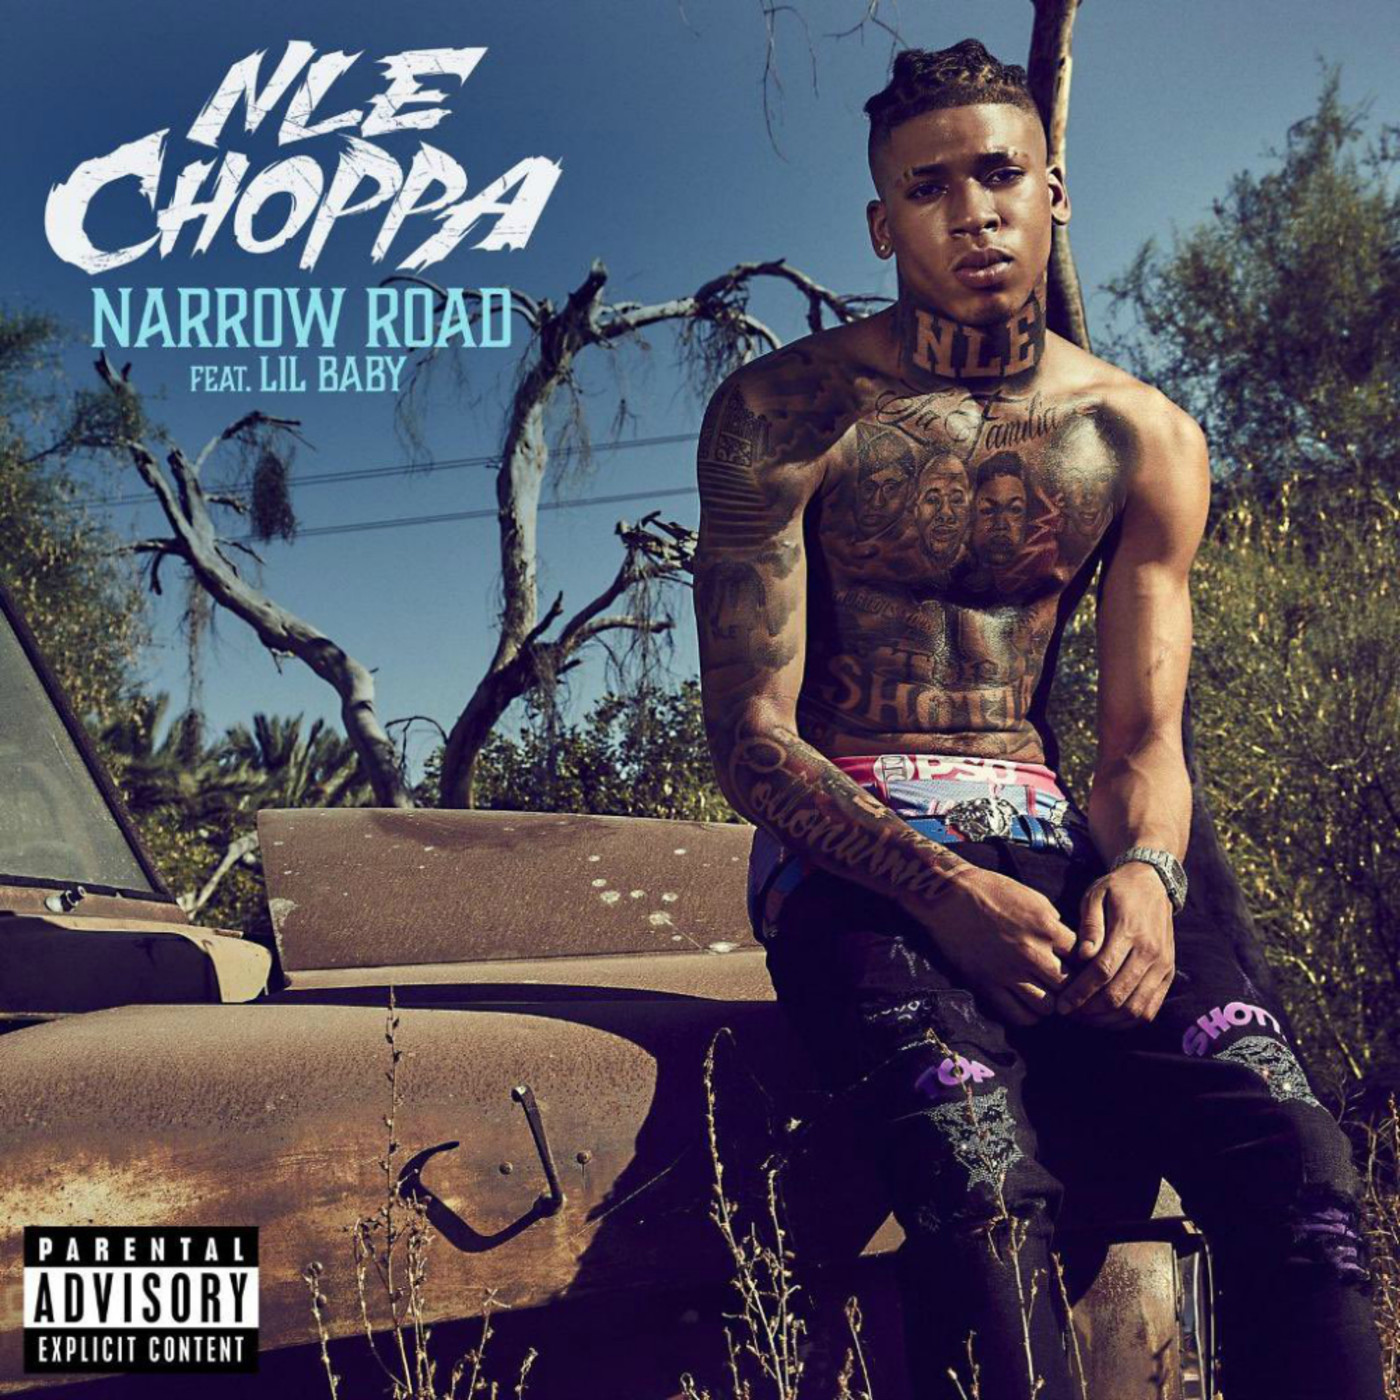 NLE Choppa – Narrow Road feat. Lil Baby (Official Music Video)